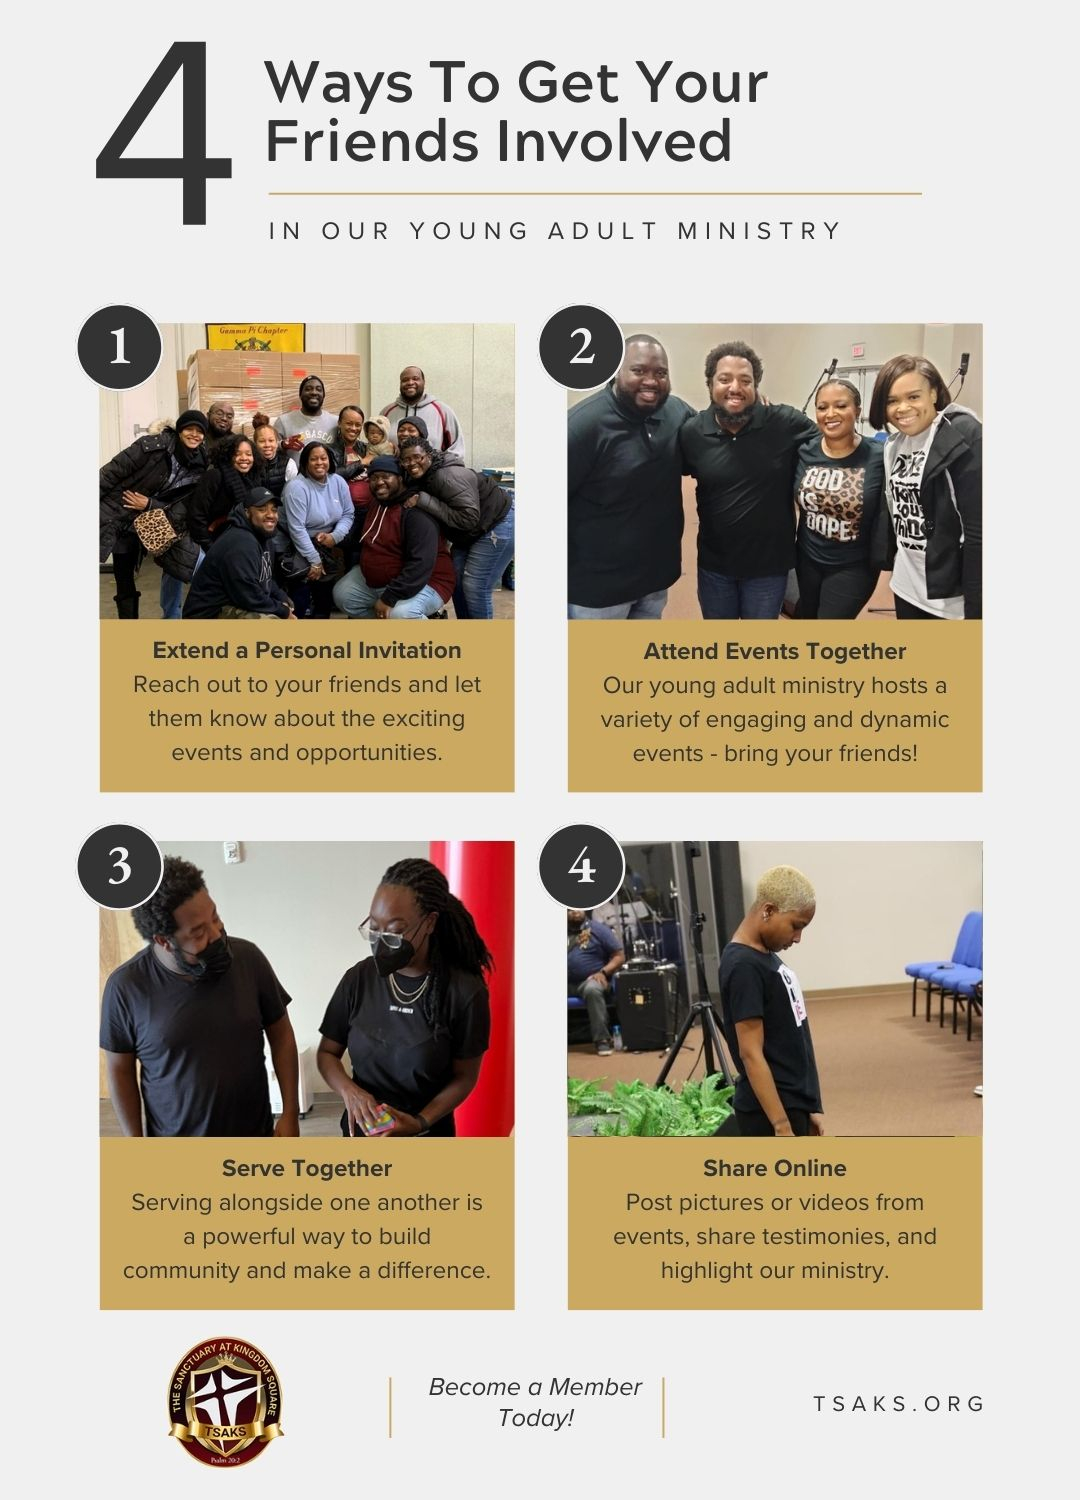 4 Ways To Get Your Friends Involved in Our Young Adult Ministry